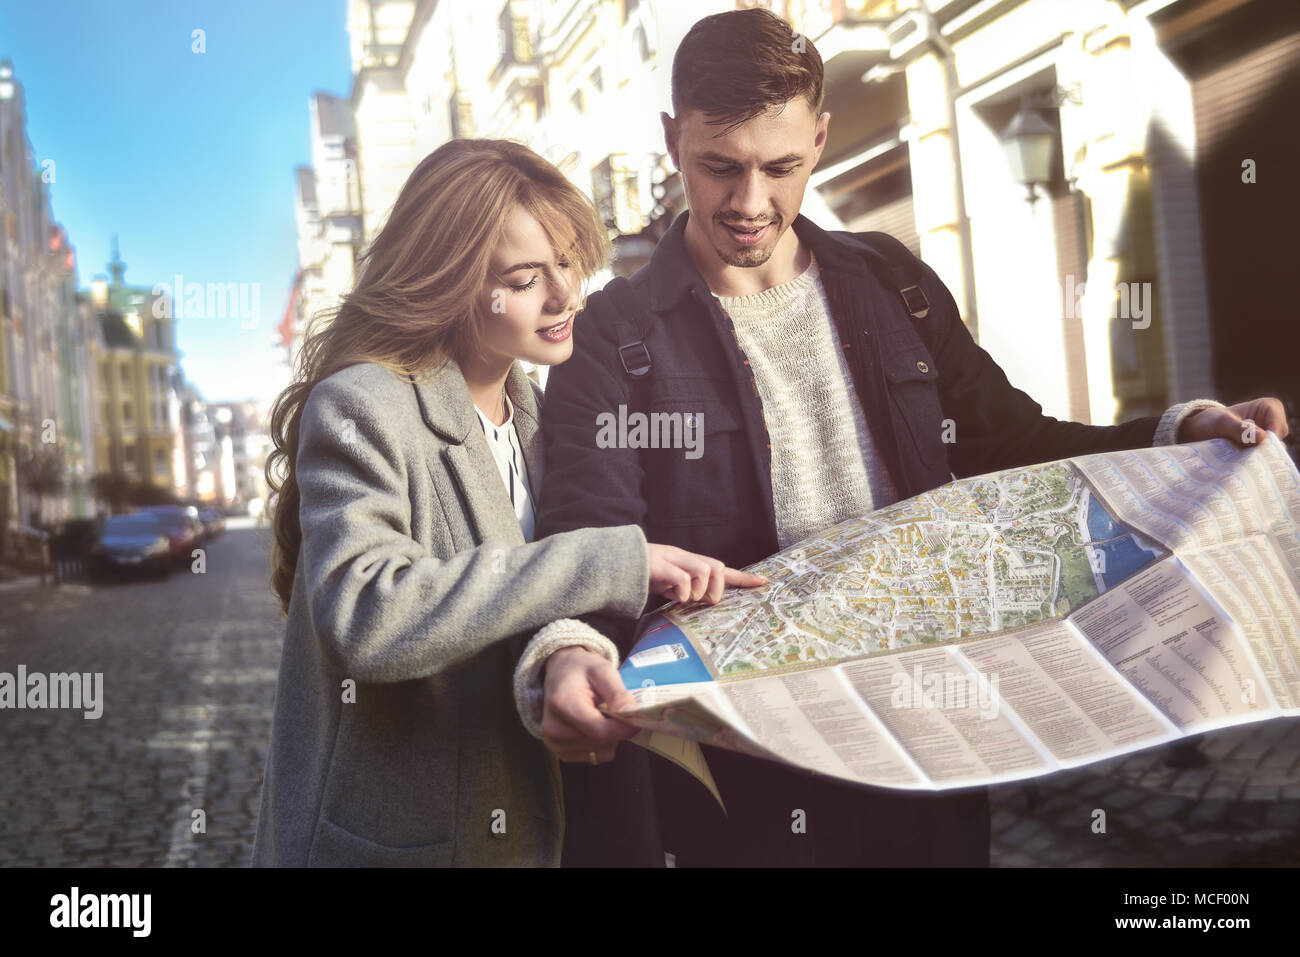 Couple of young tourists reading a map in the city Stock Photo